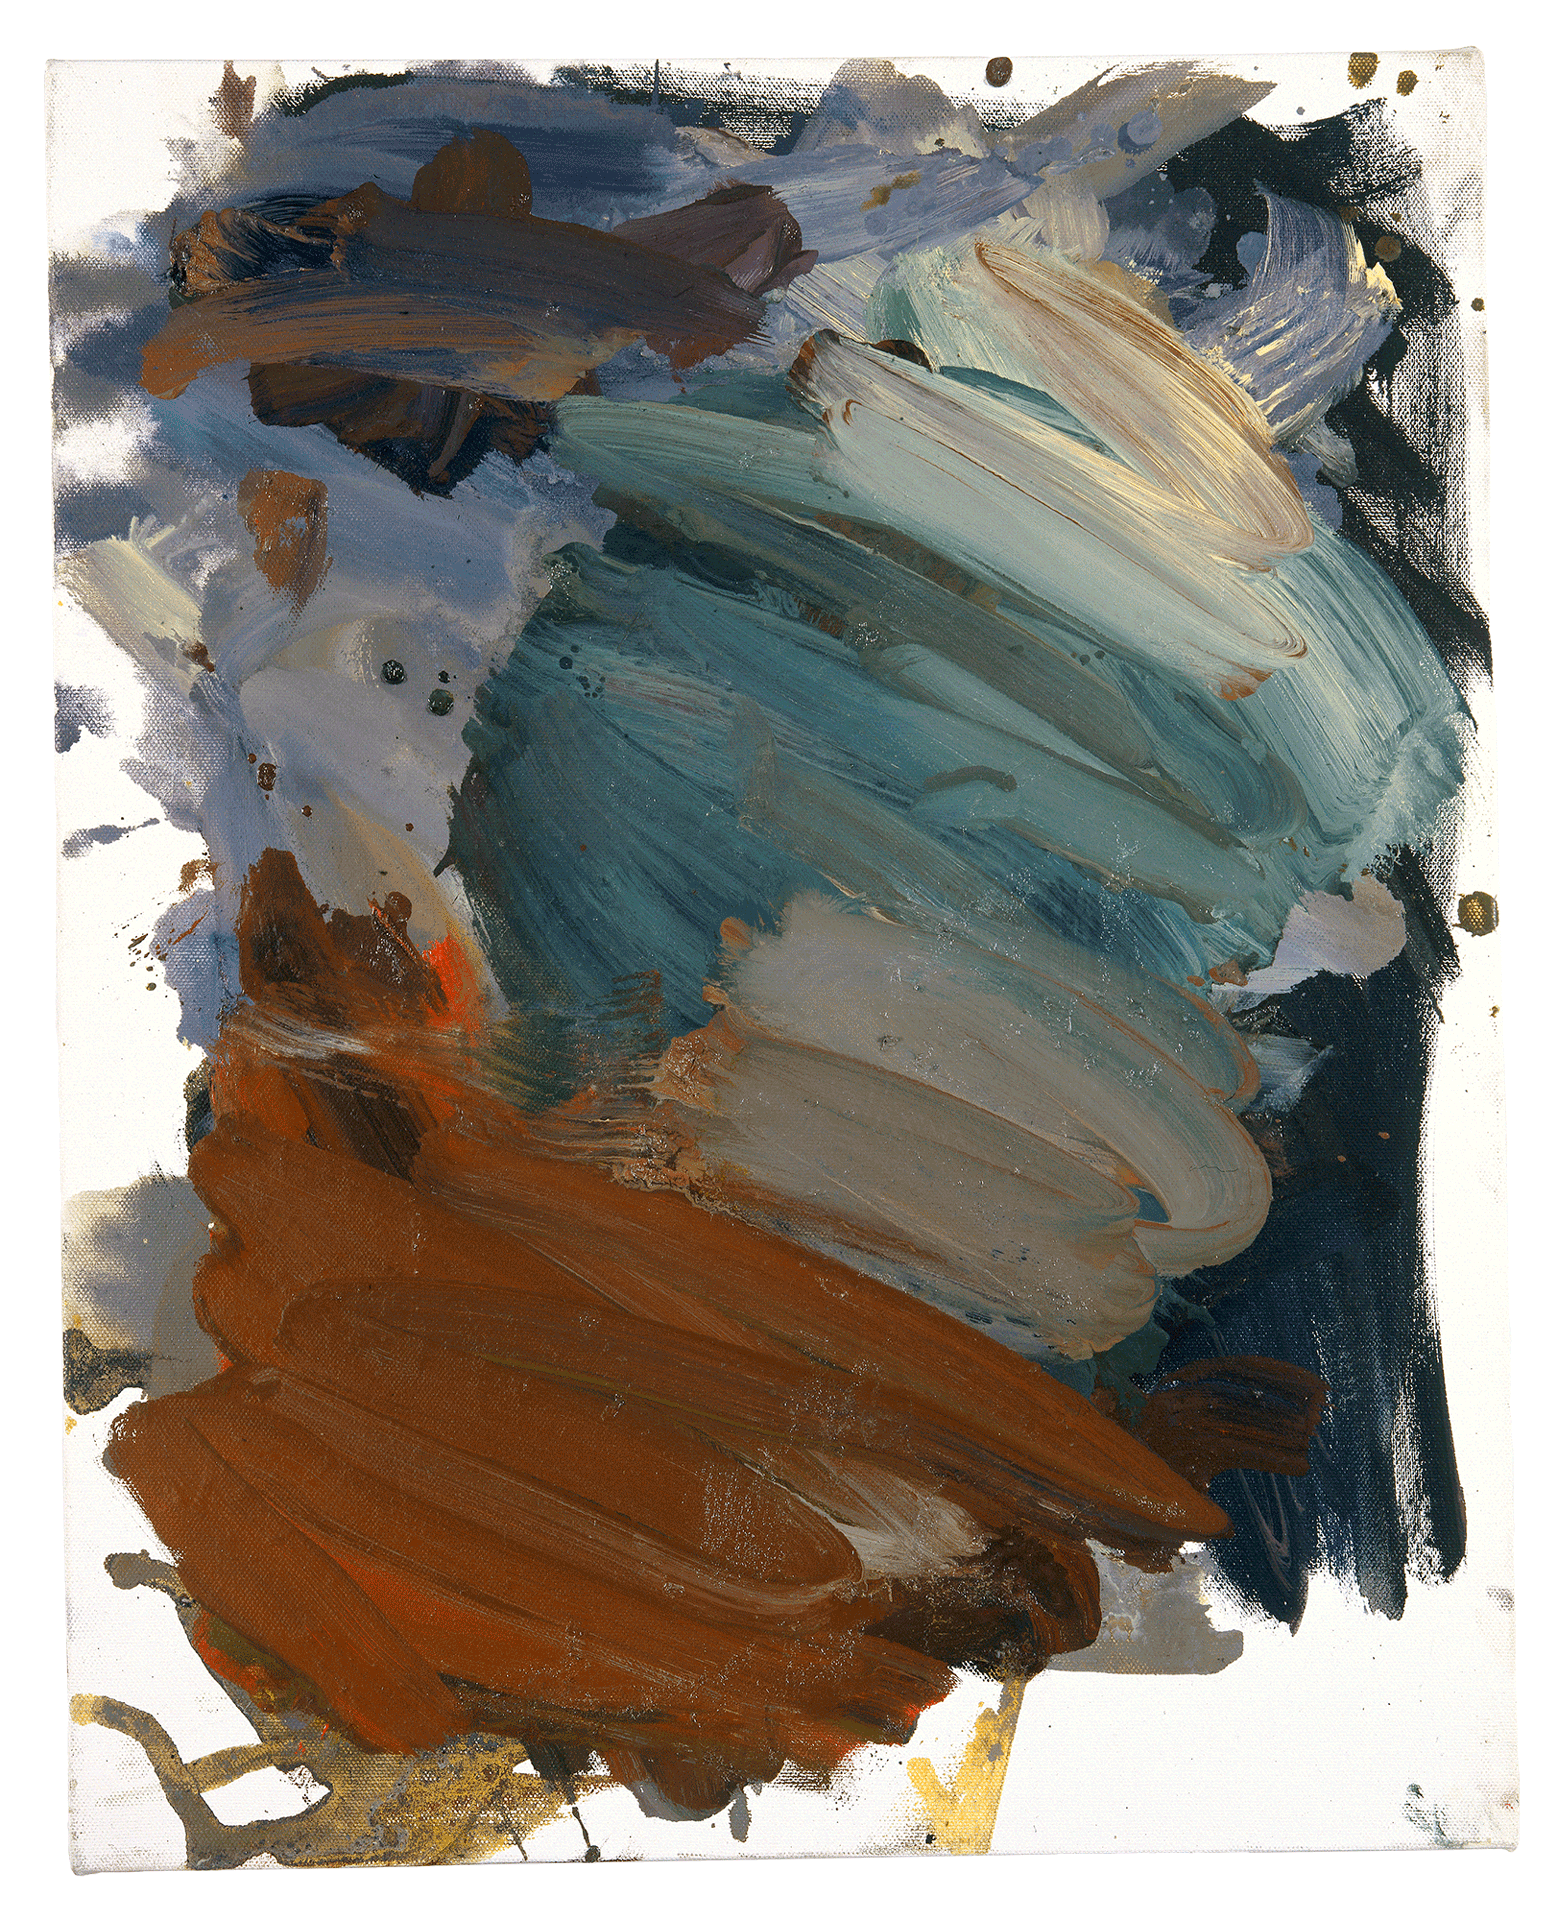 An untitled painting by Josh Smith, dated 2008.